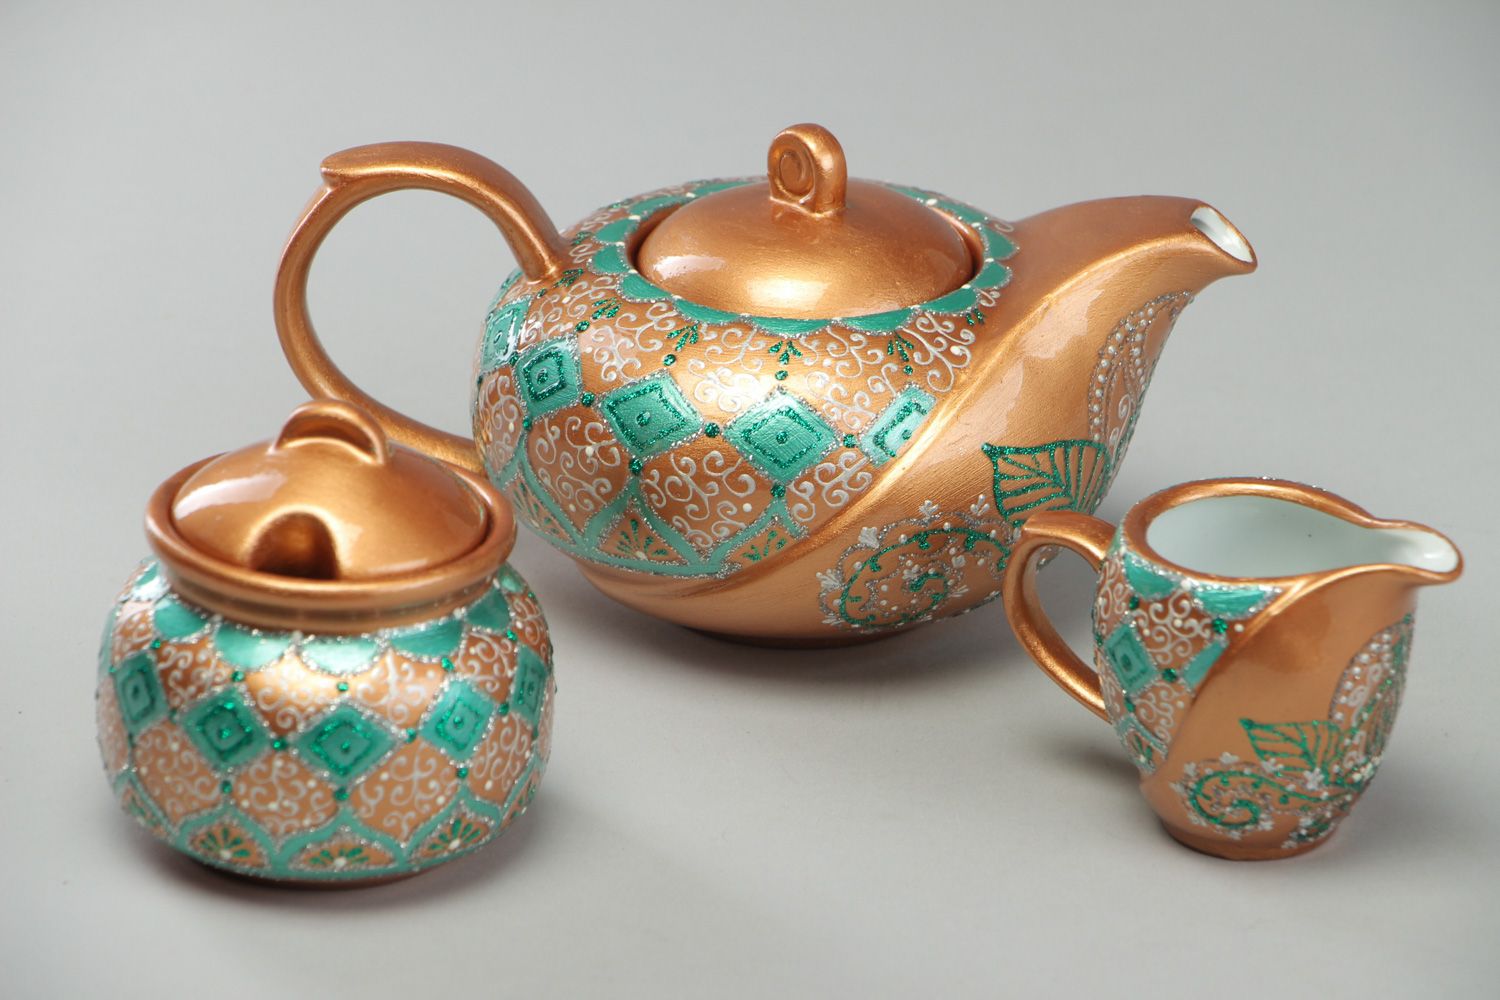 Tea set with teapot sugar jar and creamer jug in golden and green color 1,8 lb photo 1